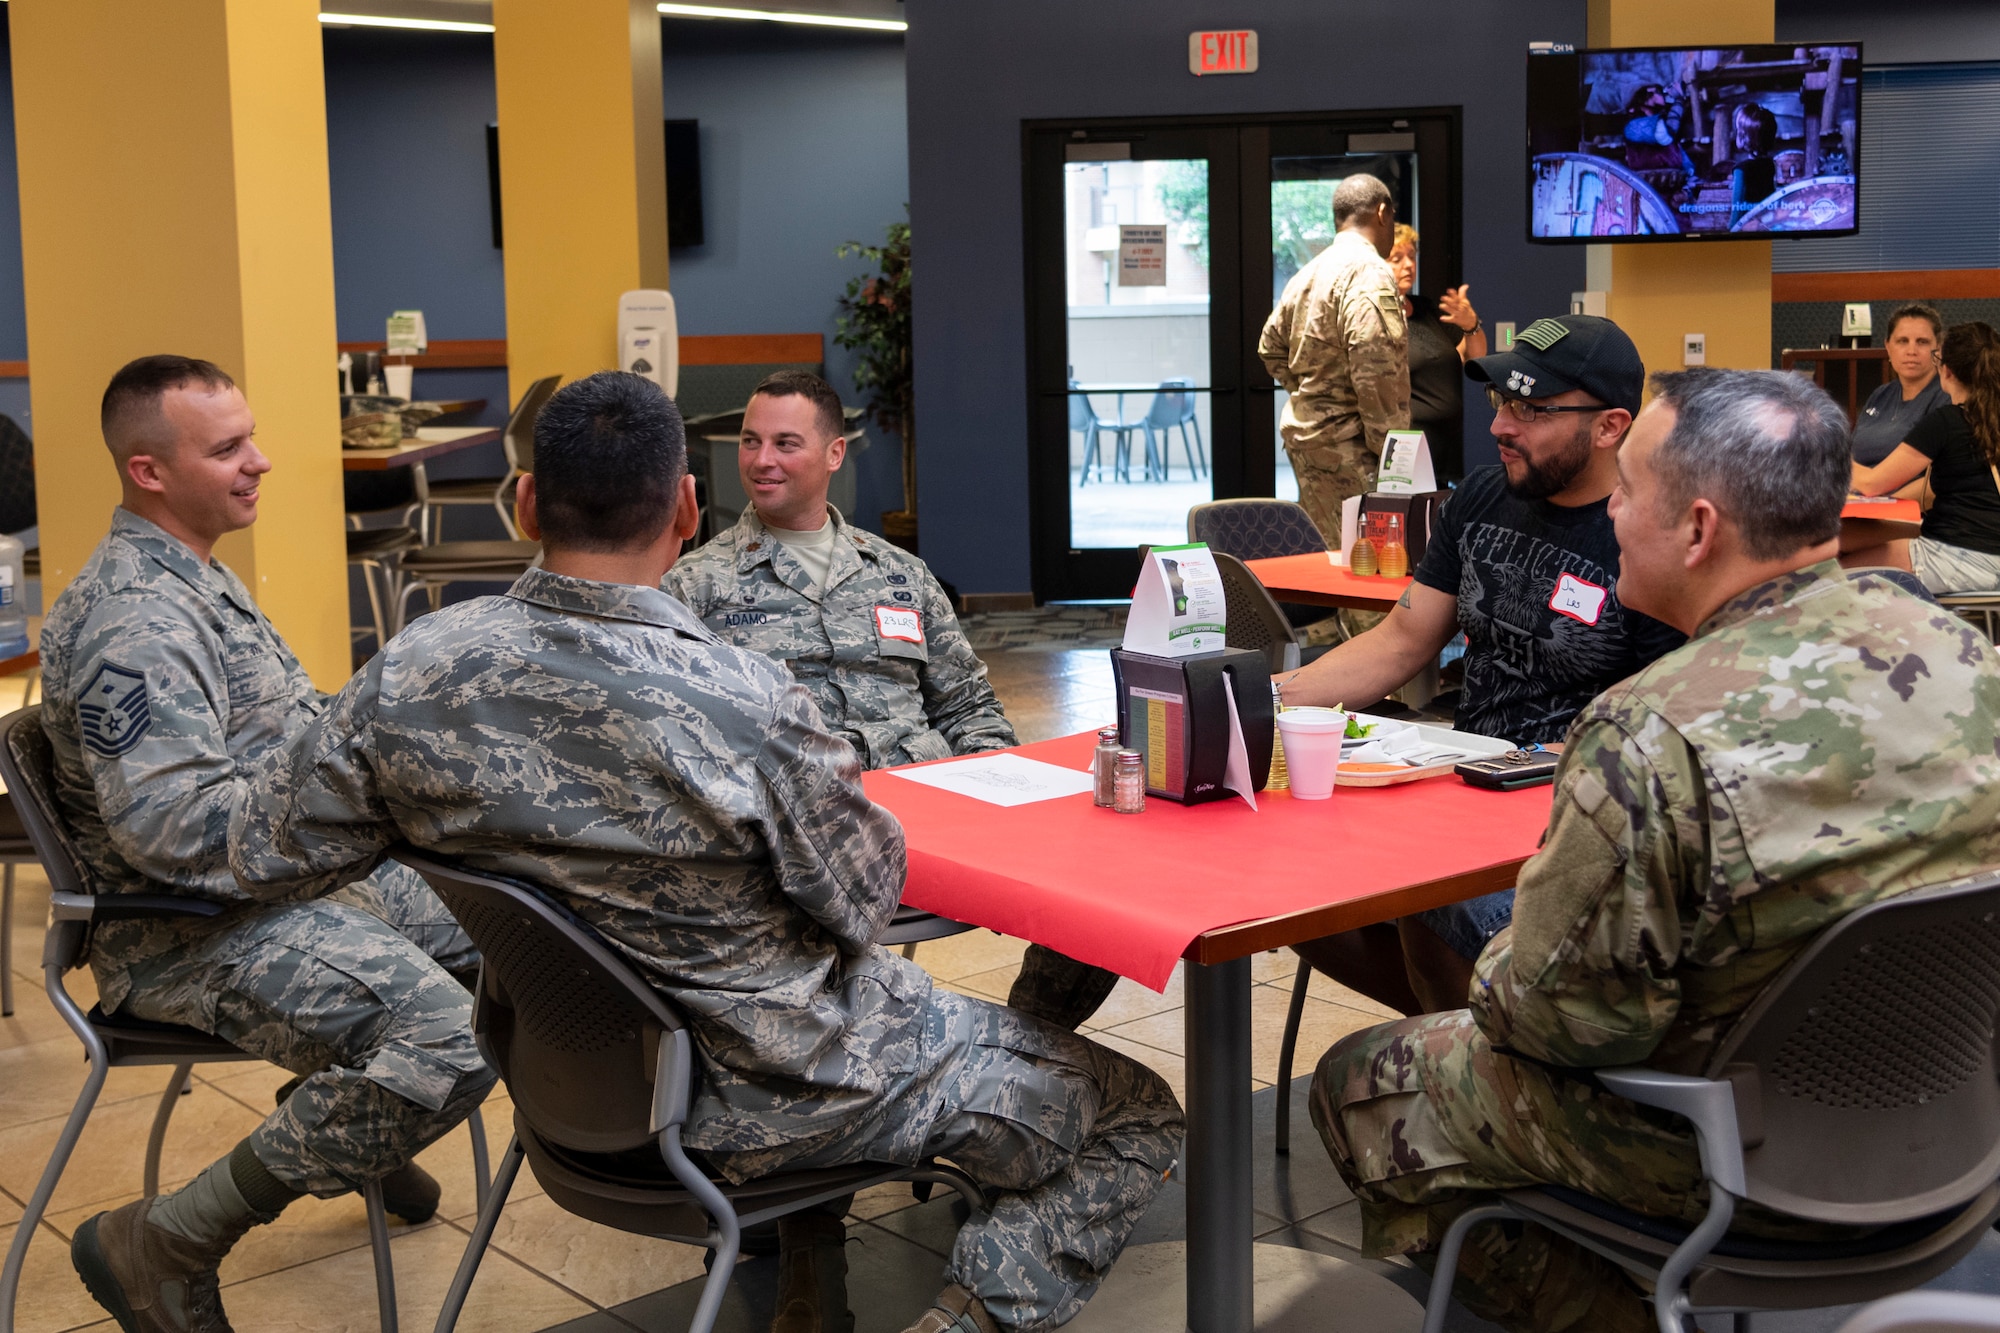 Airmen socialize during a deployed spouse dinner, June 18, 2019, at Moody Air Force Base, Ga. The dinner served as an opportunity for the families of deployed members to bond and provide relief. The mission's success depends on resilient Airmen and families, who are prepared to make sacrifices with the support of their fellow Airmen, local communities and leadership. (U.S. Air Force photo by Airman 1st Class Hayden Legg)